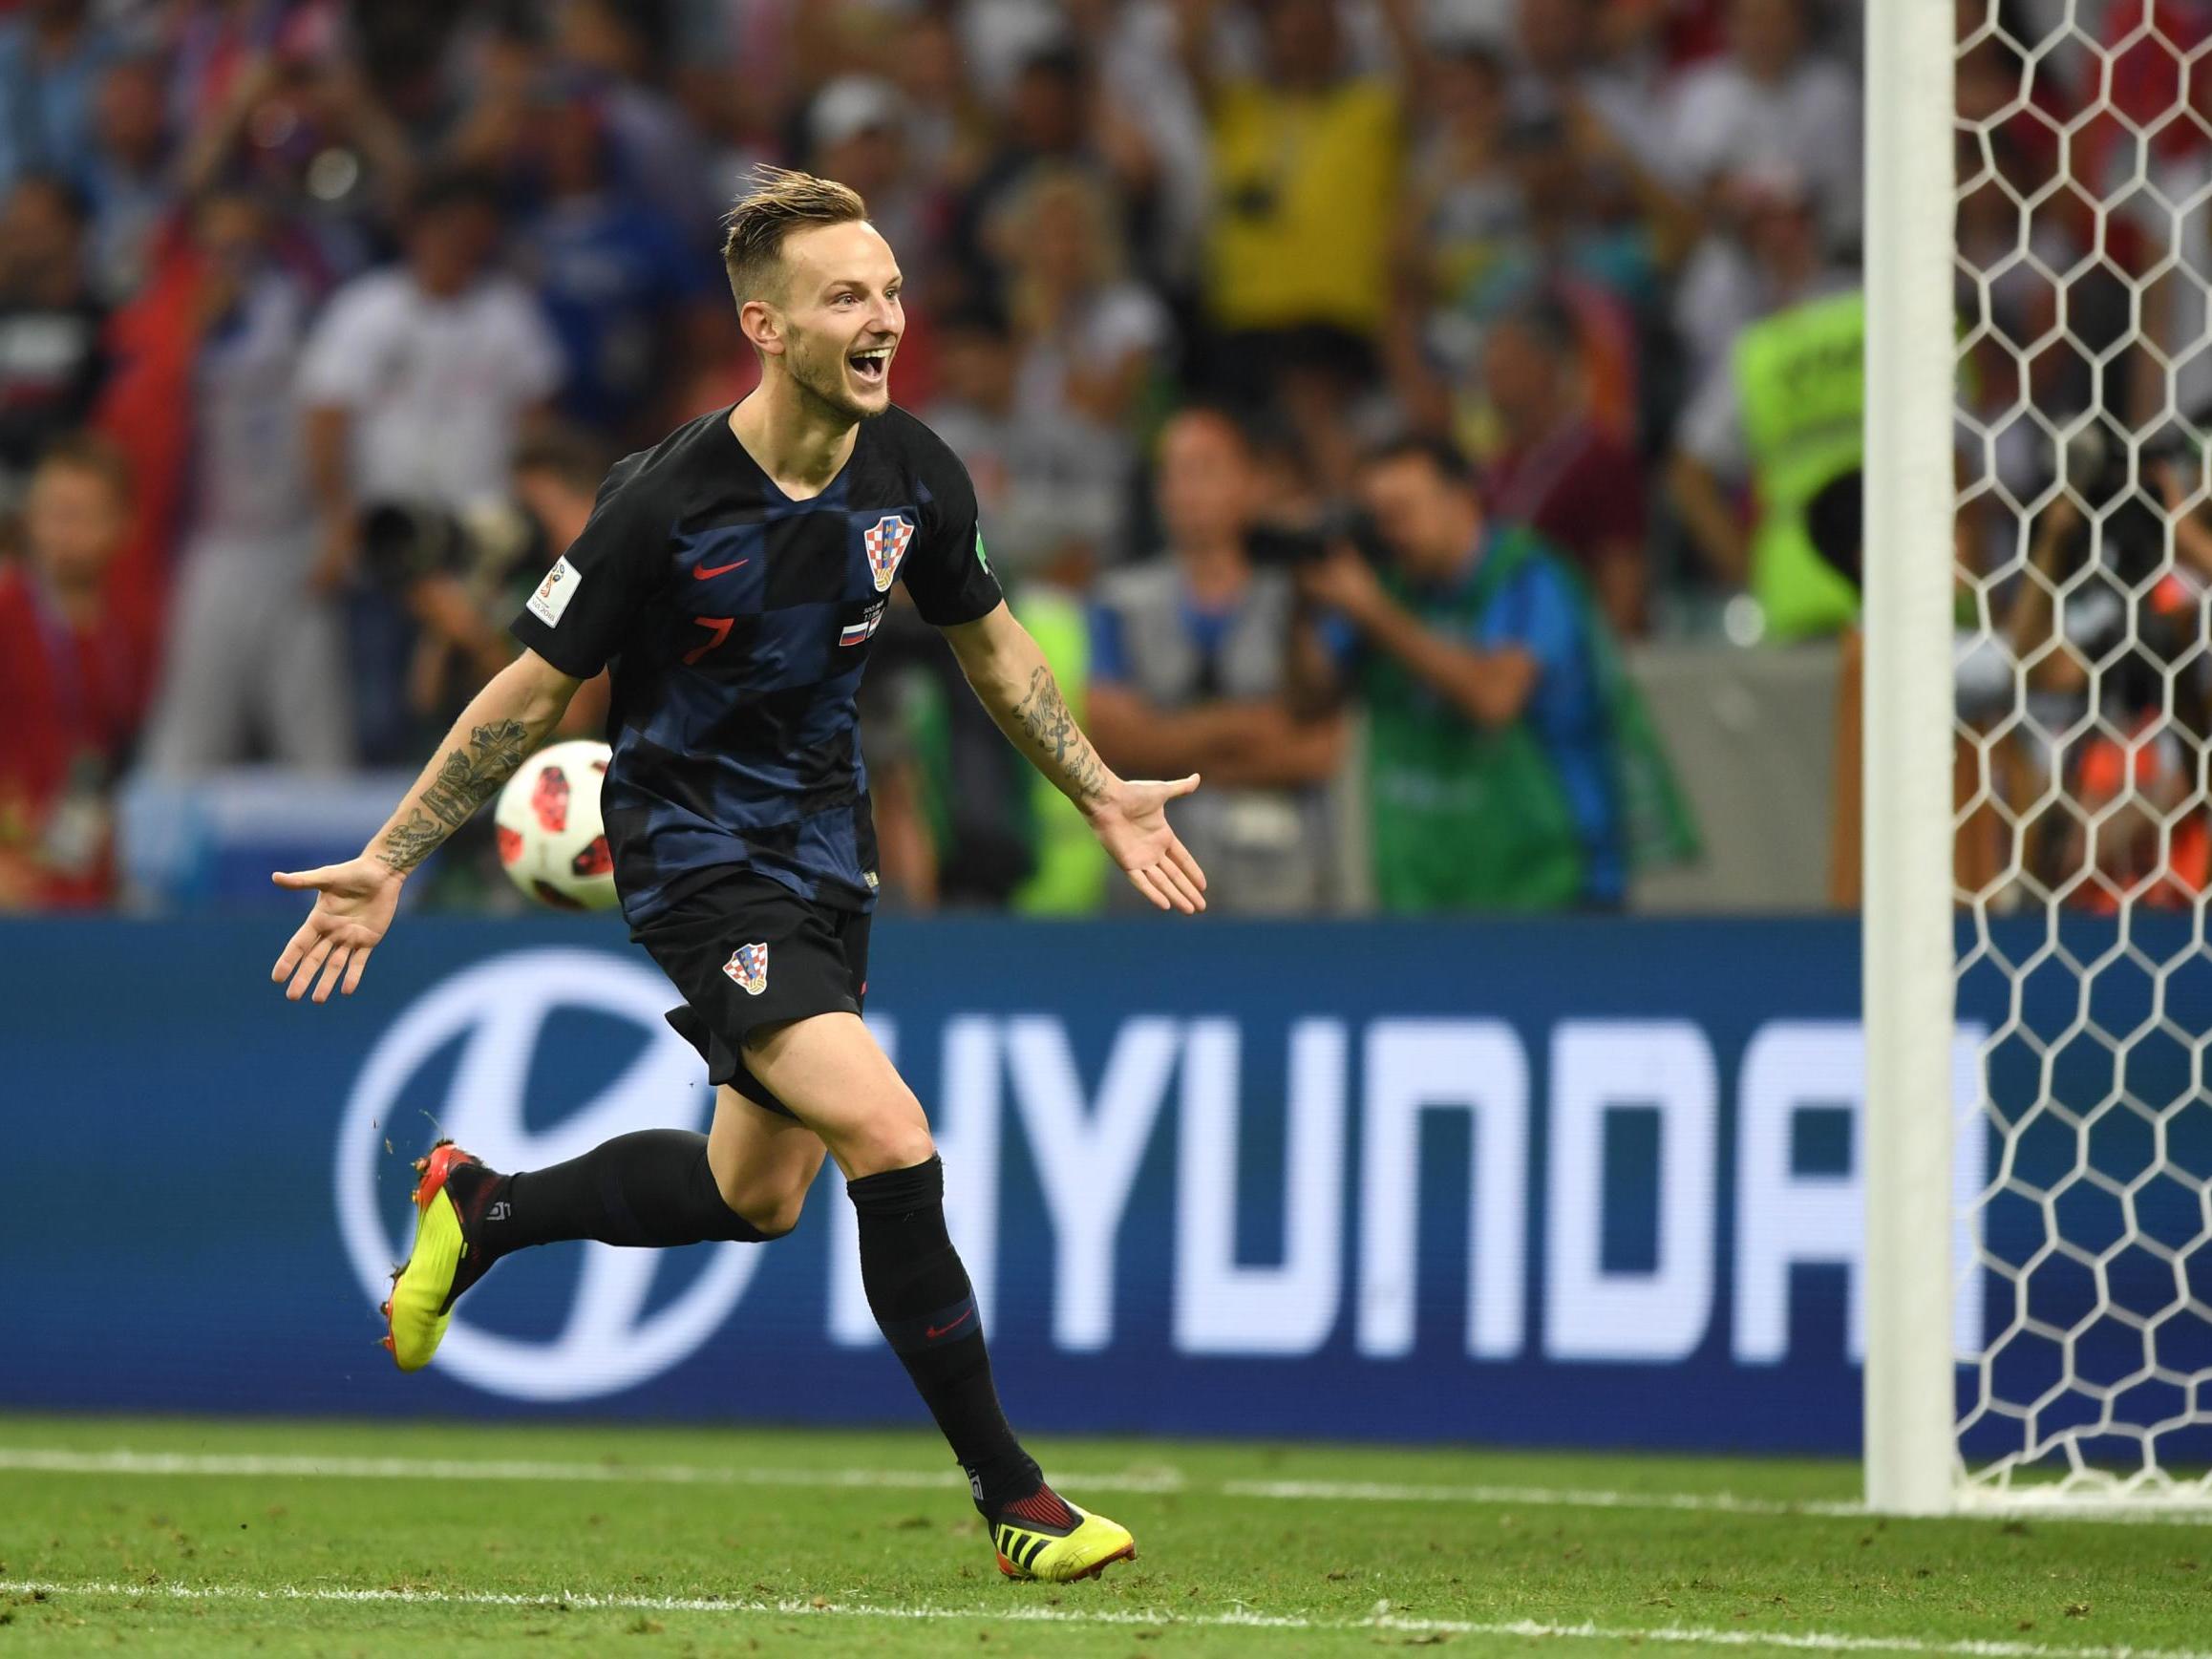 England to play Croatia in World Cup 2018 semi-final after Ivan Rakitic ends hosts&apos; run in penalty shootout